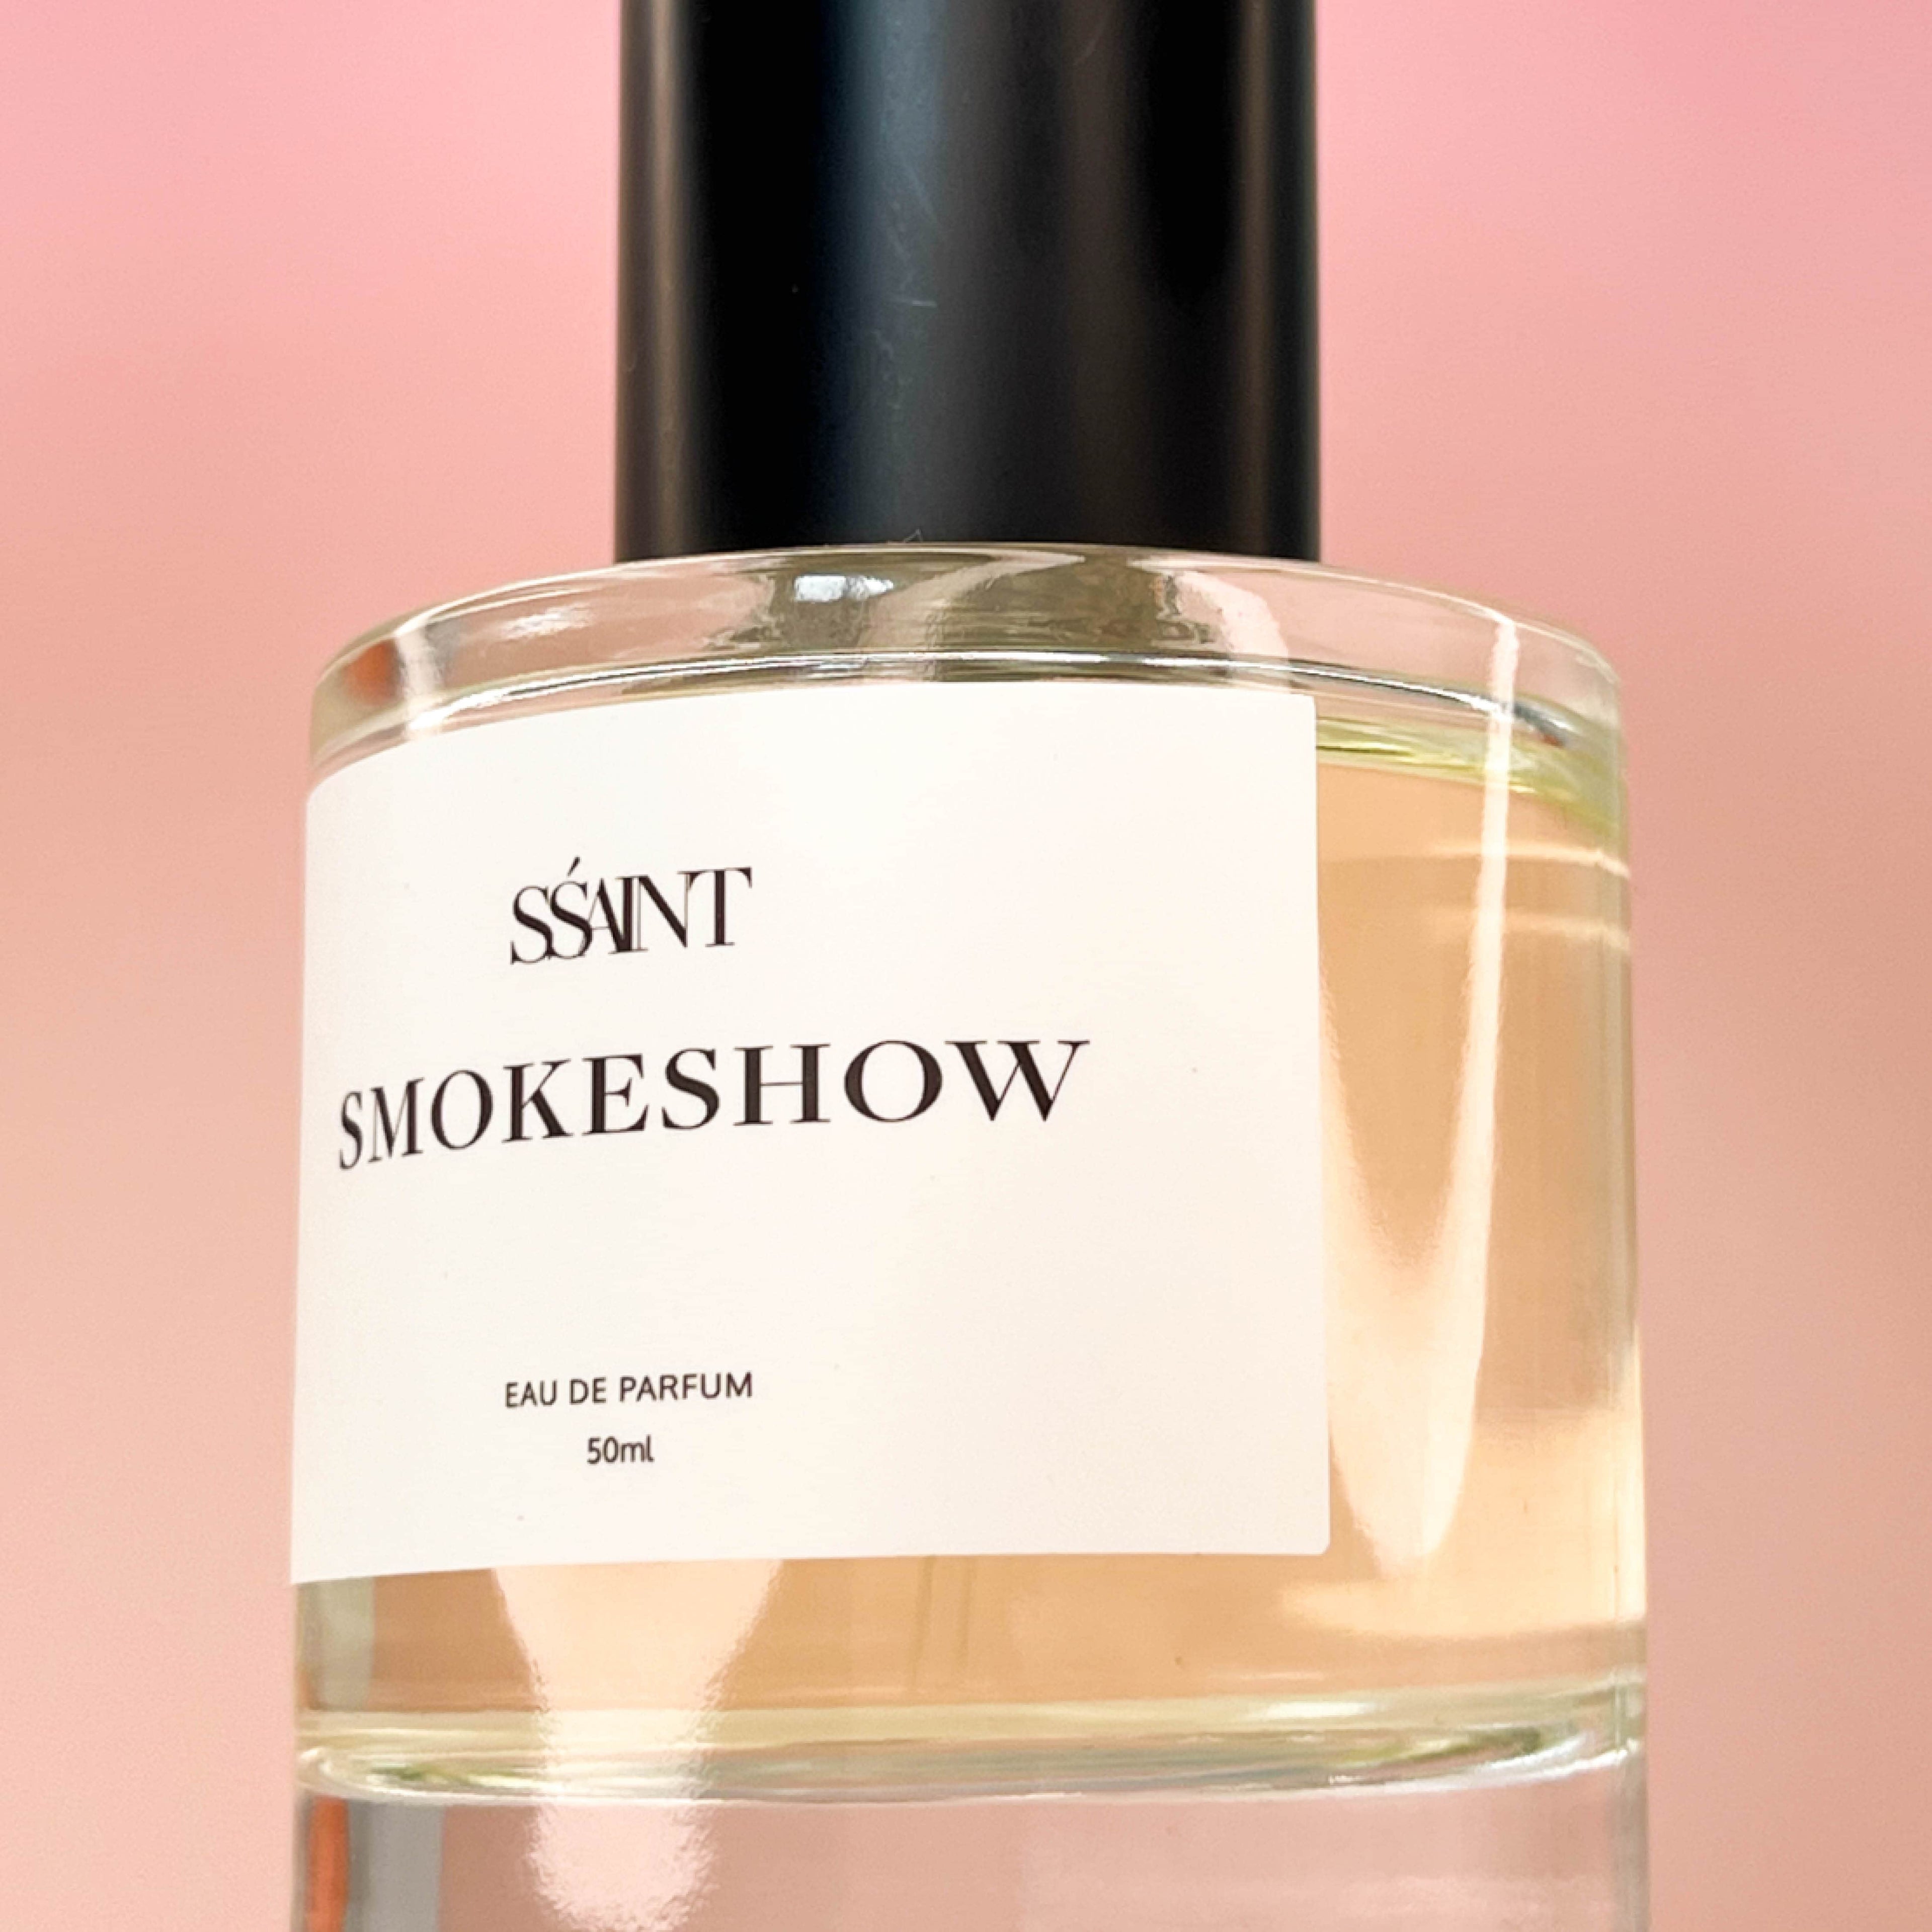 THE SMOKESHOW FRAGRANCE COLLECTION